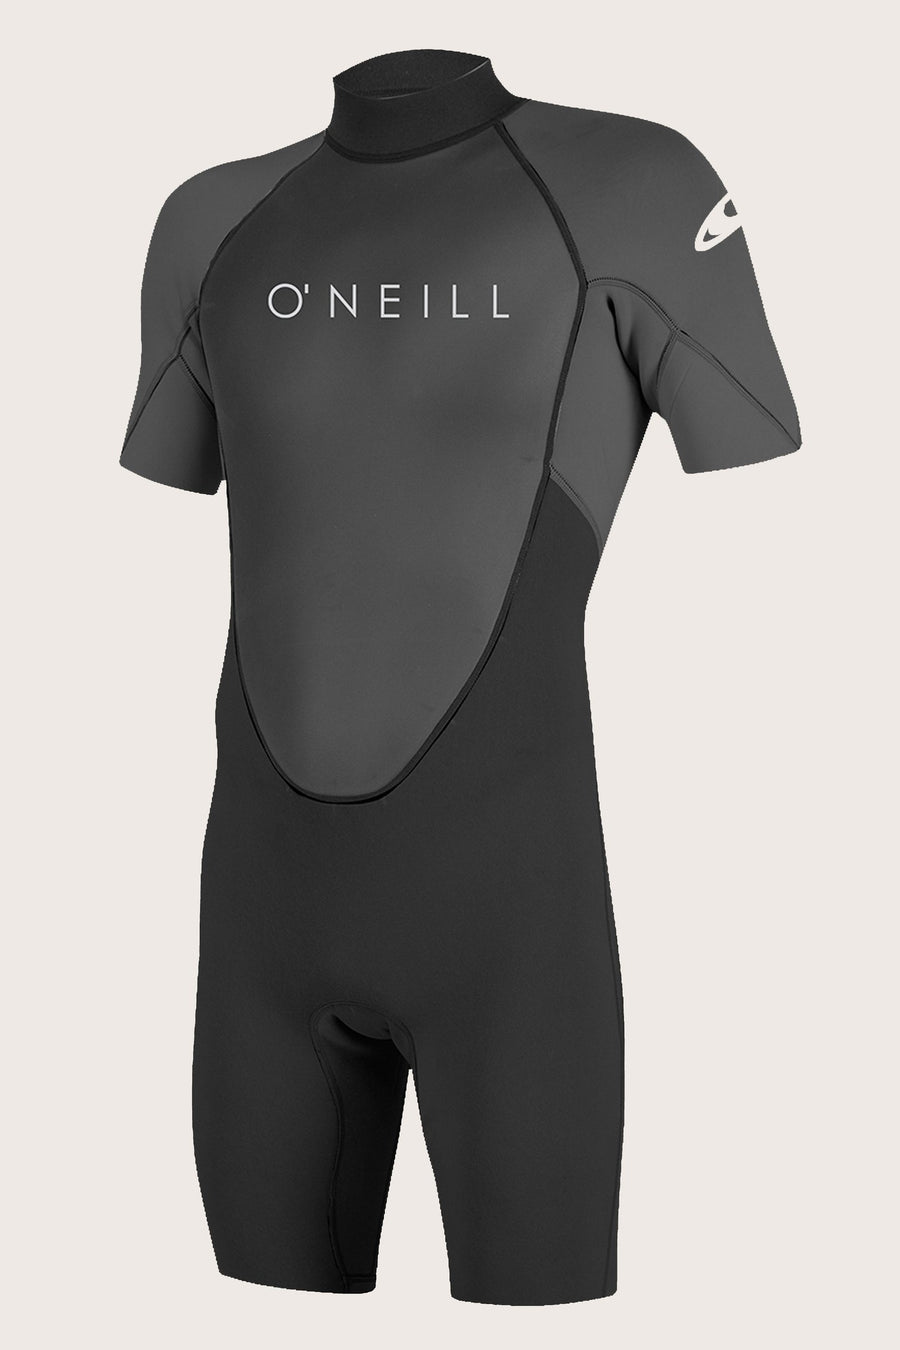 Wetsuit - Men's O'Neill Reactor 2mm Spring Wetsuit